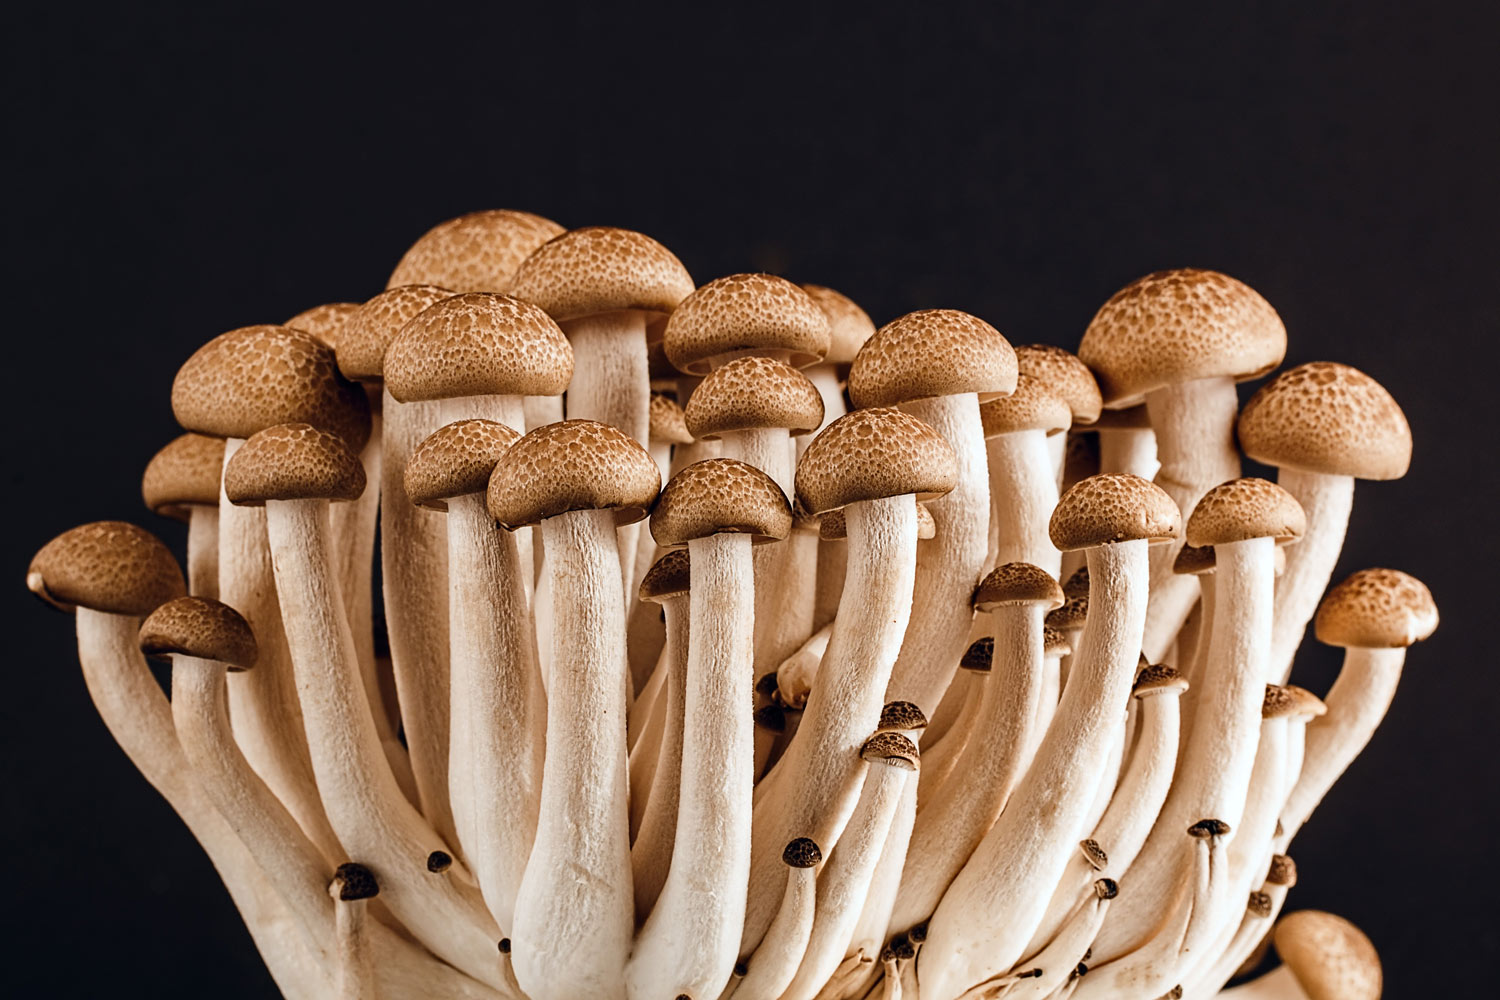 There’s a deadly fungus among us—and it’s spreading